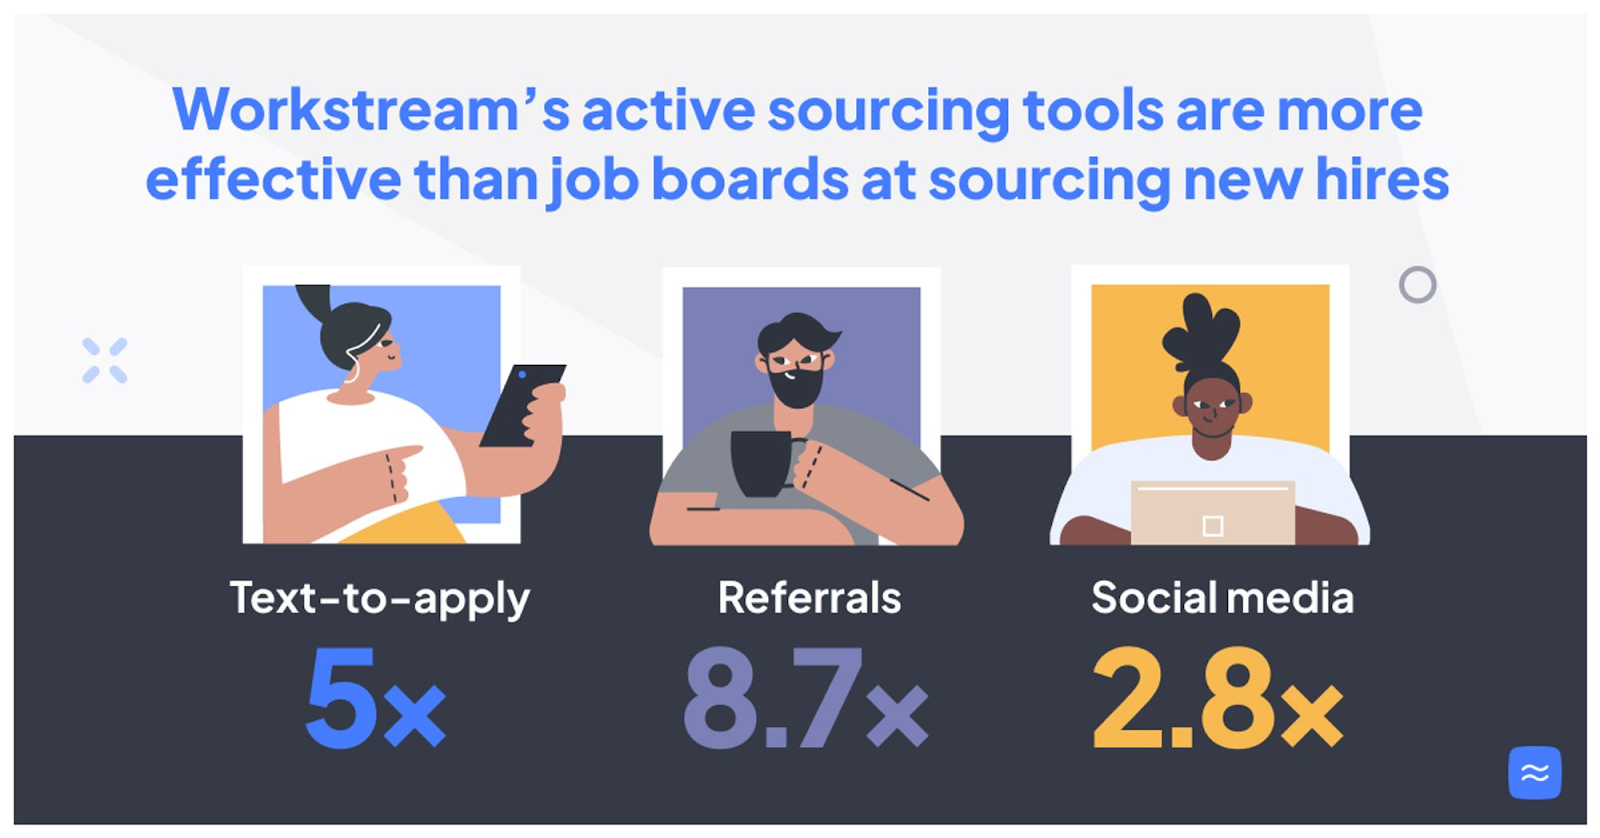 Workstream's active sourcing tools are more effective than job boards at sourcing new hires